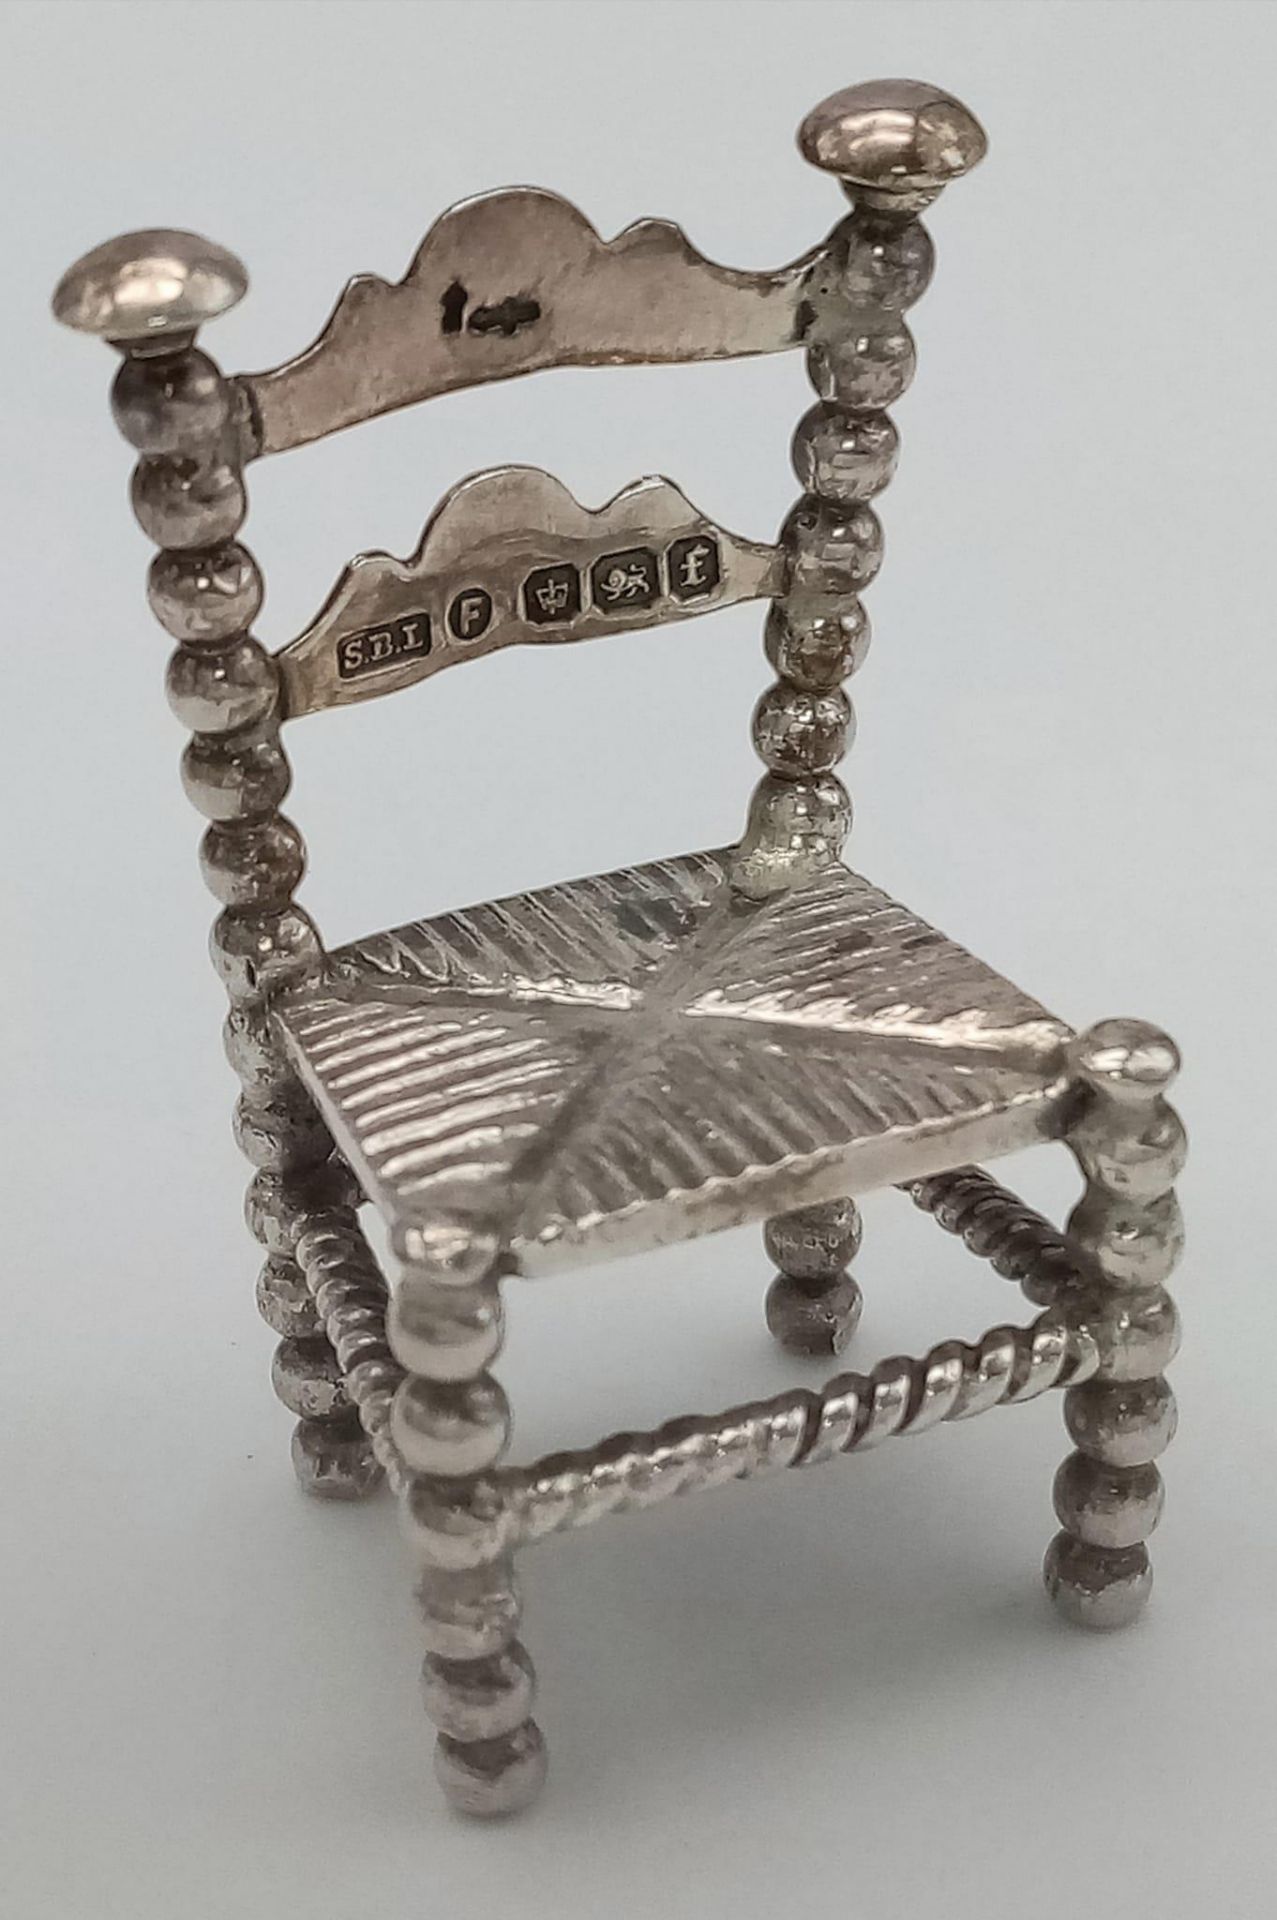 A Rare Imported Sterling Silver Miniature Chair Figure - 4cm tall. The chair has hallmarks for